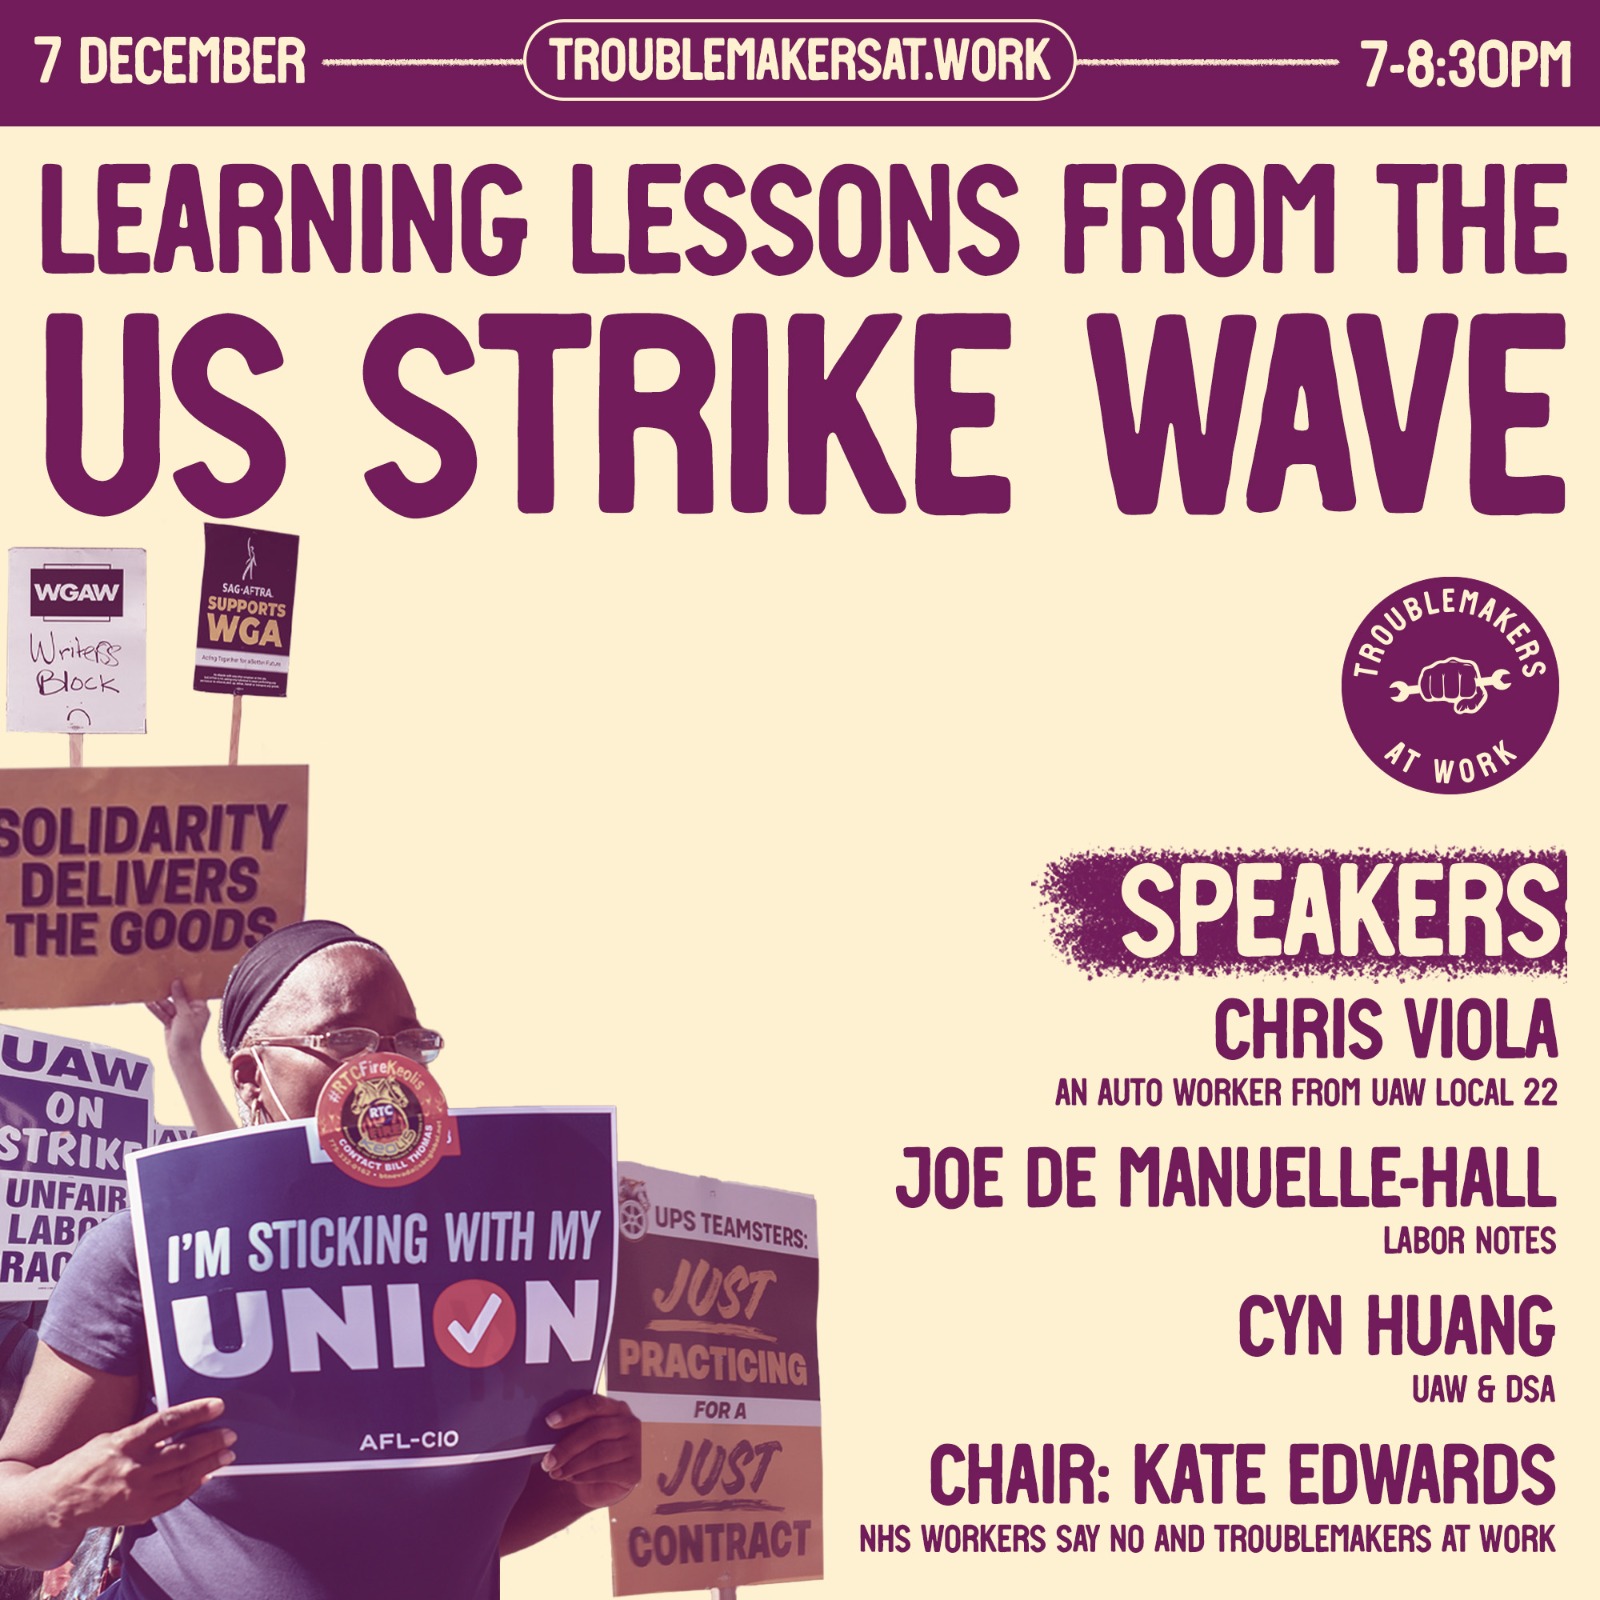 7 December, 7-8:30pm. troublemakersat.work. Learning lessons from the US strike save. Speakers: Chris Viola, Joe De Manuelle-Hall, Cyn Huang. Chair: Kate Edwards.